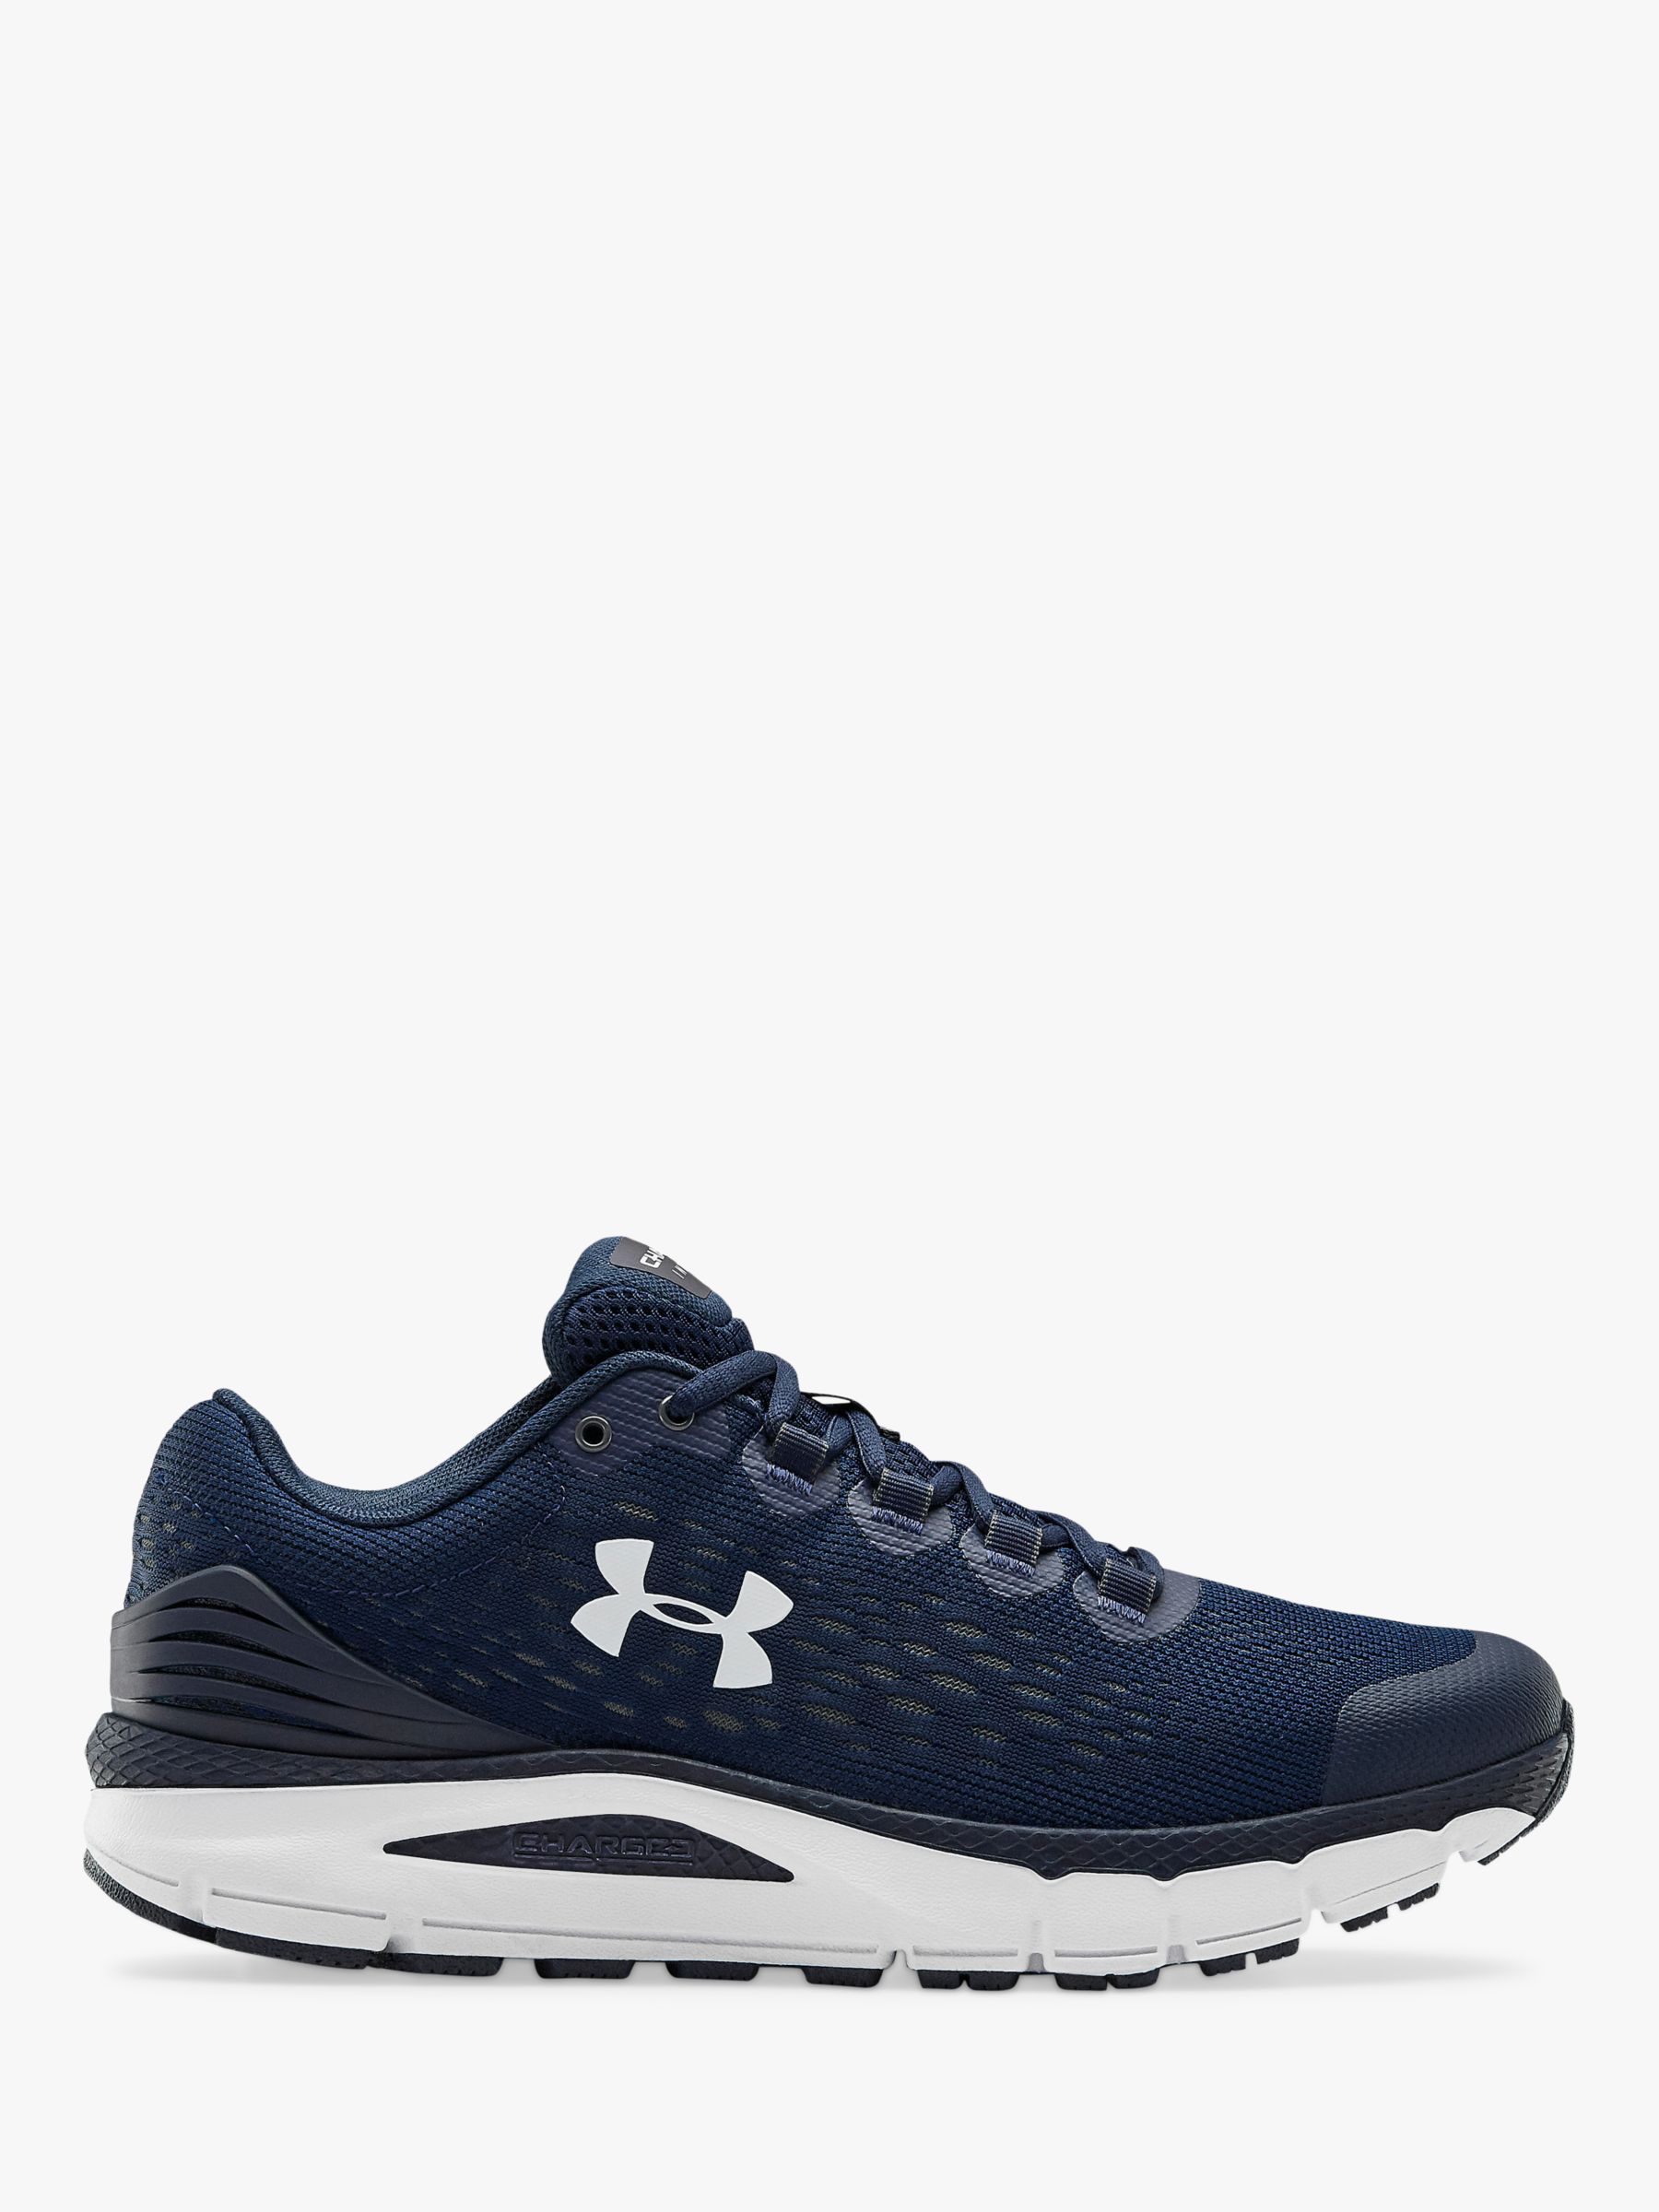 Under Armour Charged Intake 4 Men's Running Shoes, Academy/White at ...